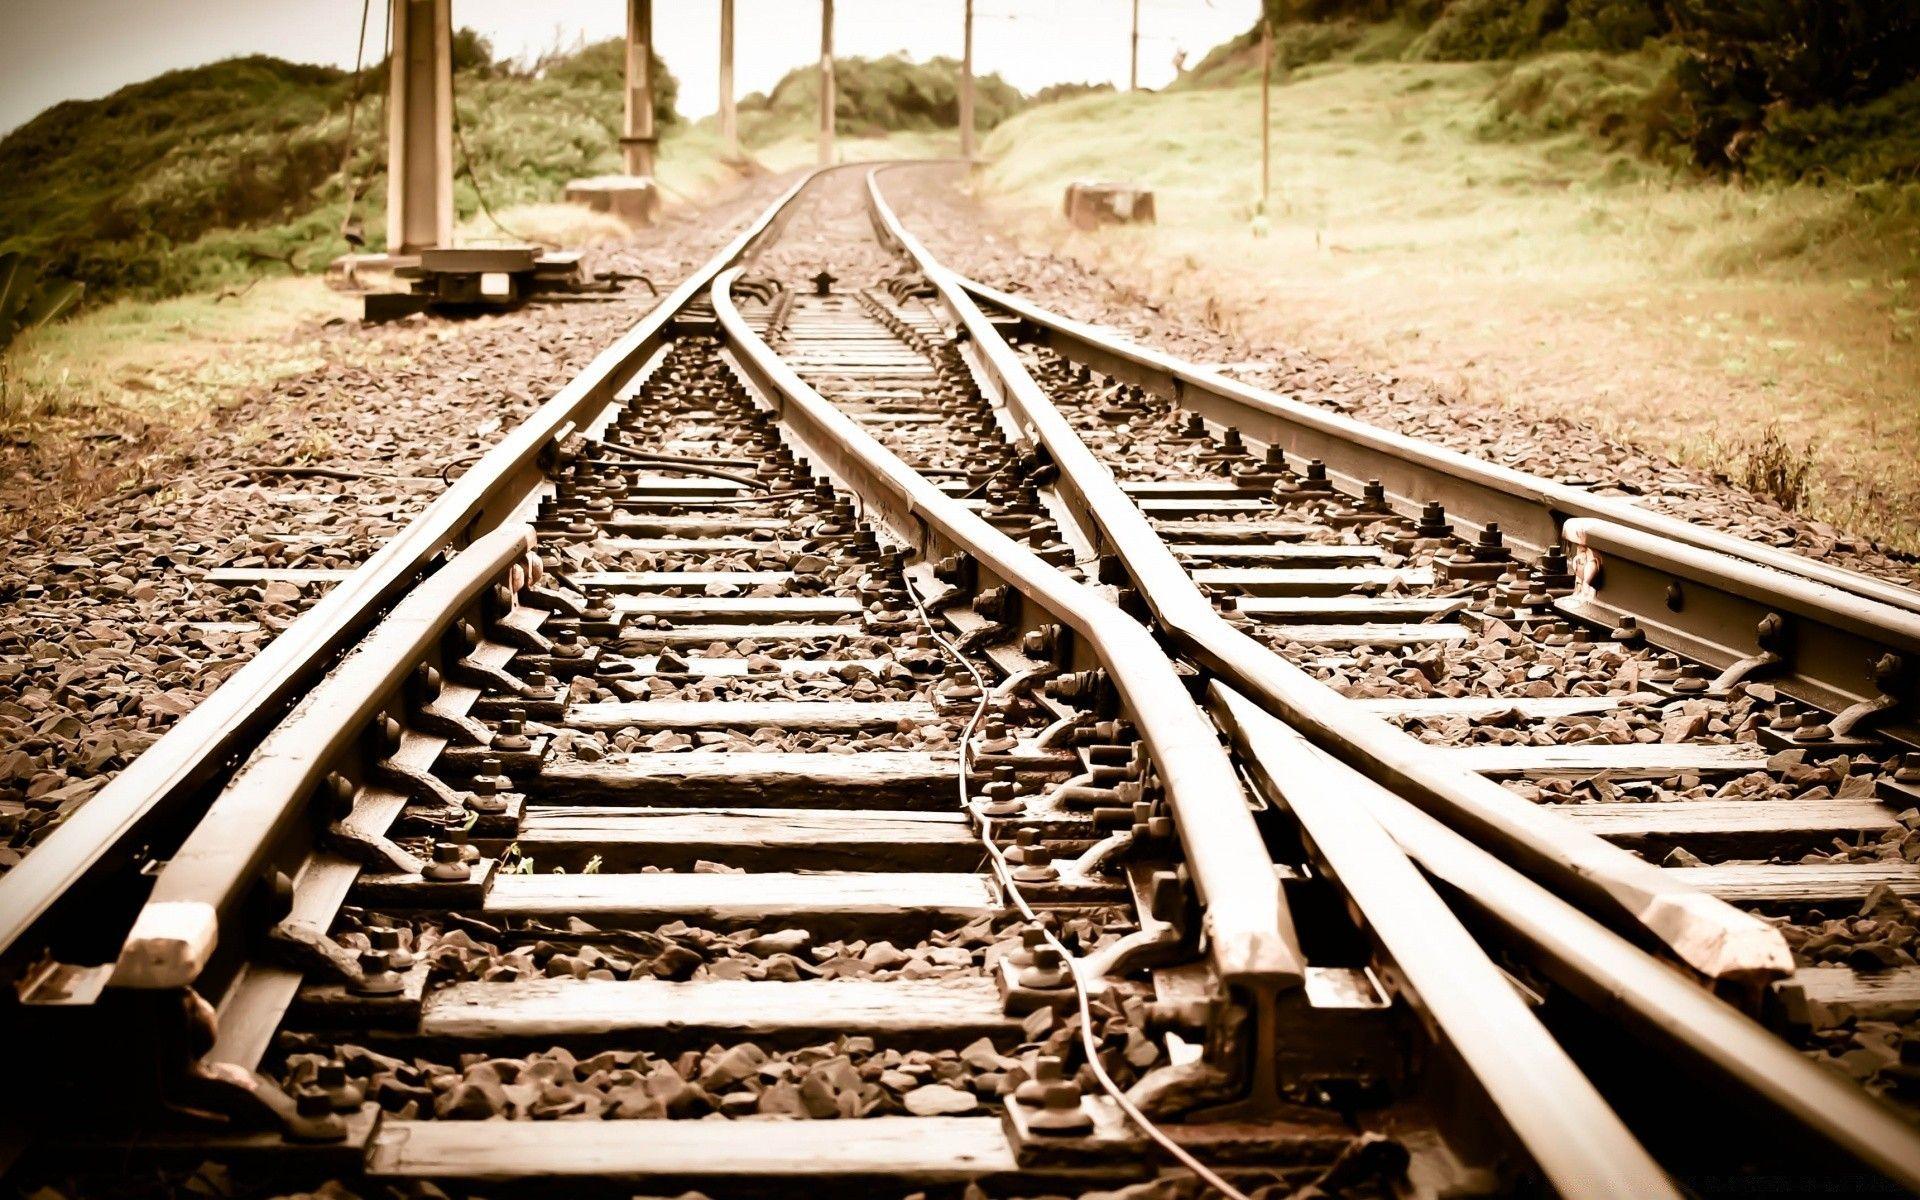 Train Tracks. Android wallpaper for free